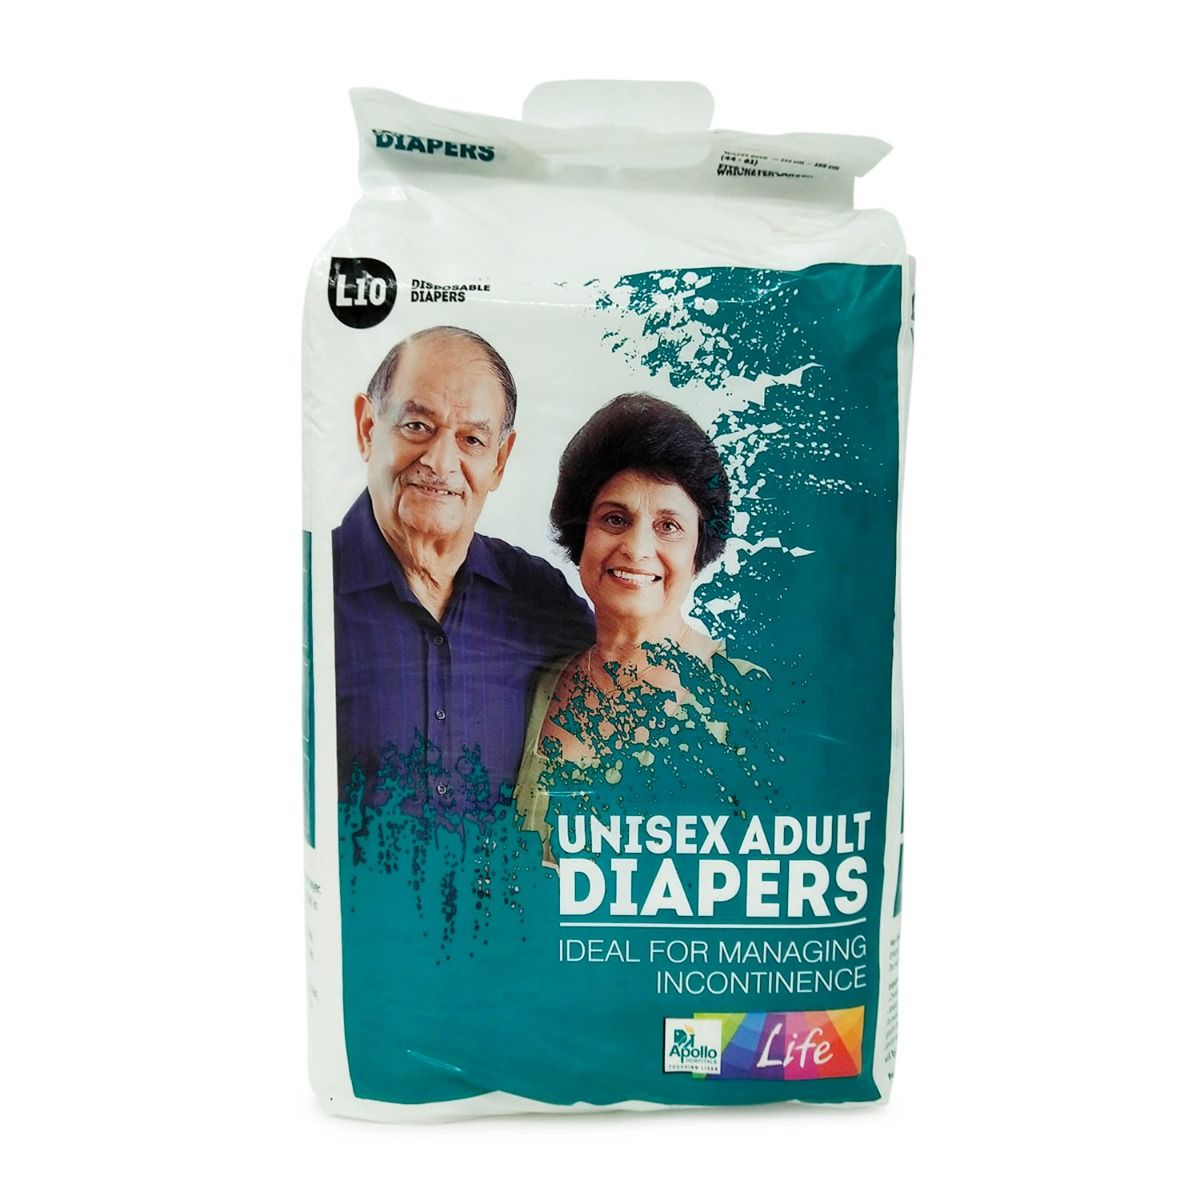 Buy Apollo Life Unisex Adult Diapers Large, 10 Count Online